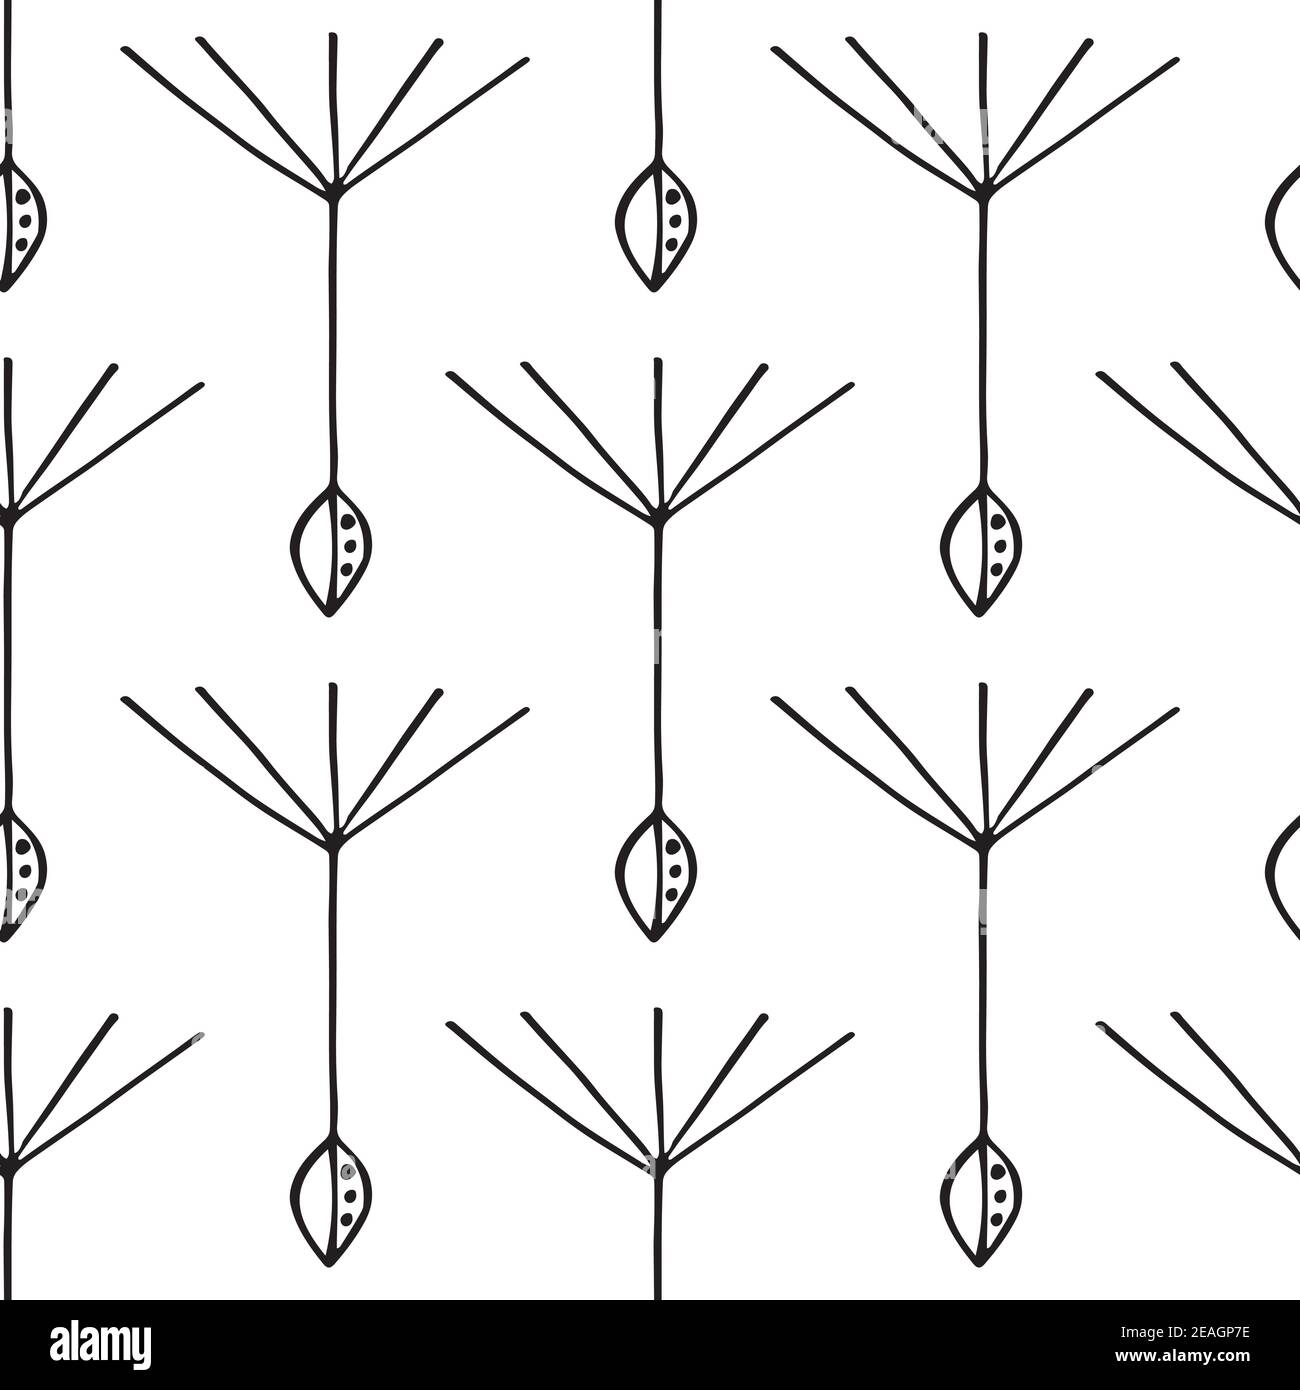 Dandelion seed seamless vector pattern background. Backdrop of abstract floating herbacious flower seeds black and white backdrop. Stylised hand drawn Stock Vector